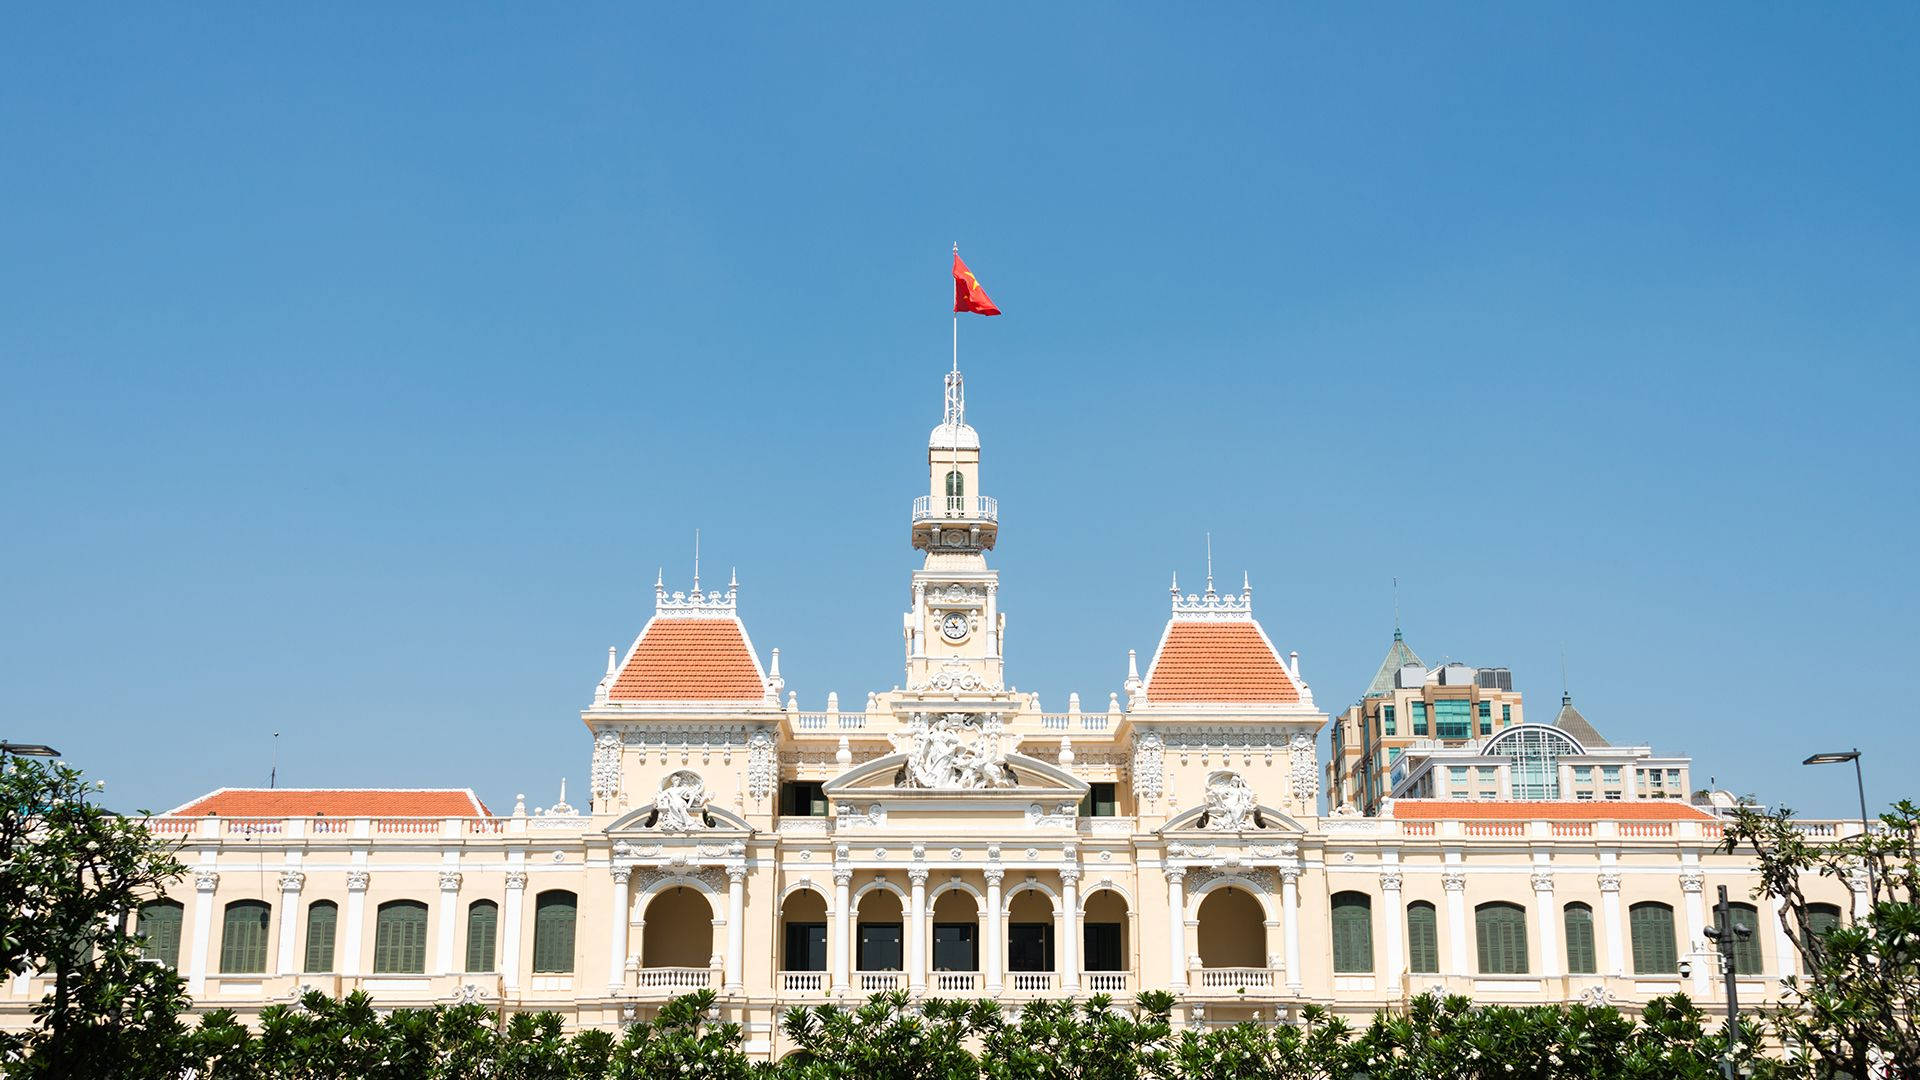 Majestic View of the Ho Chi Minh City People's Committee Building at Night Wallpaper